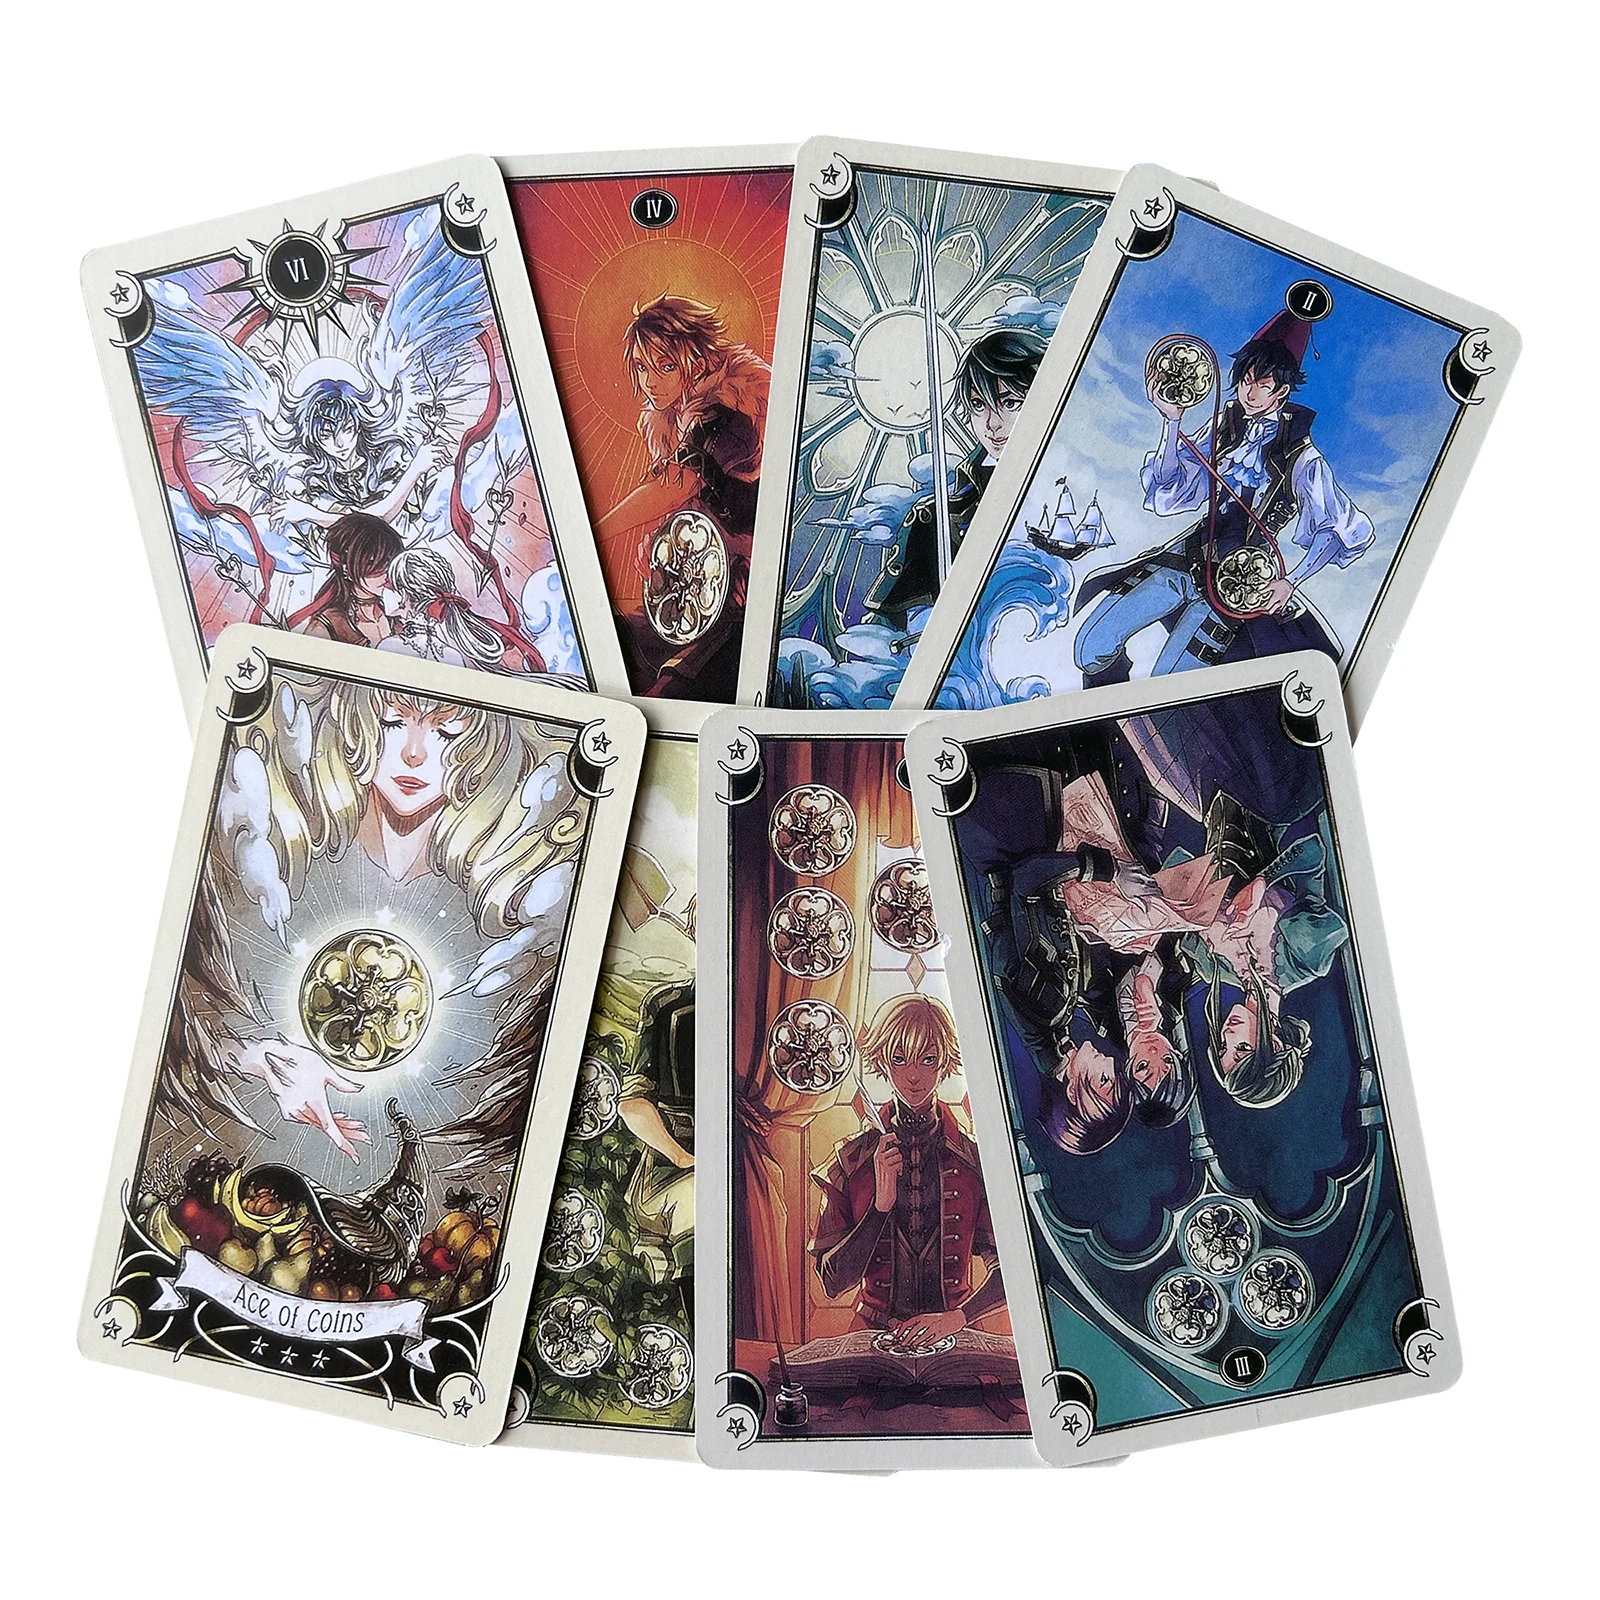 Hot Sell Tarot Cards 12x7 Board Game for Divination Personal Use Tarot Deck Party Games Full English Table Game Outdoor Camping. hot sell rider tarot cards for divination personal use tarot deck full english version board games oracle